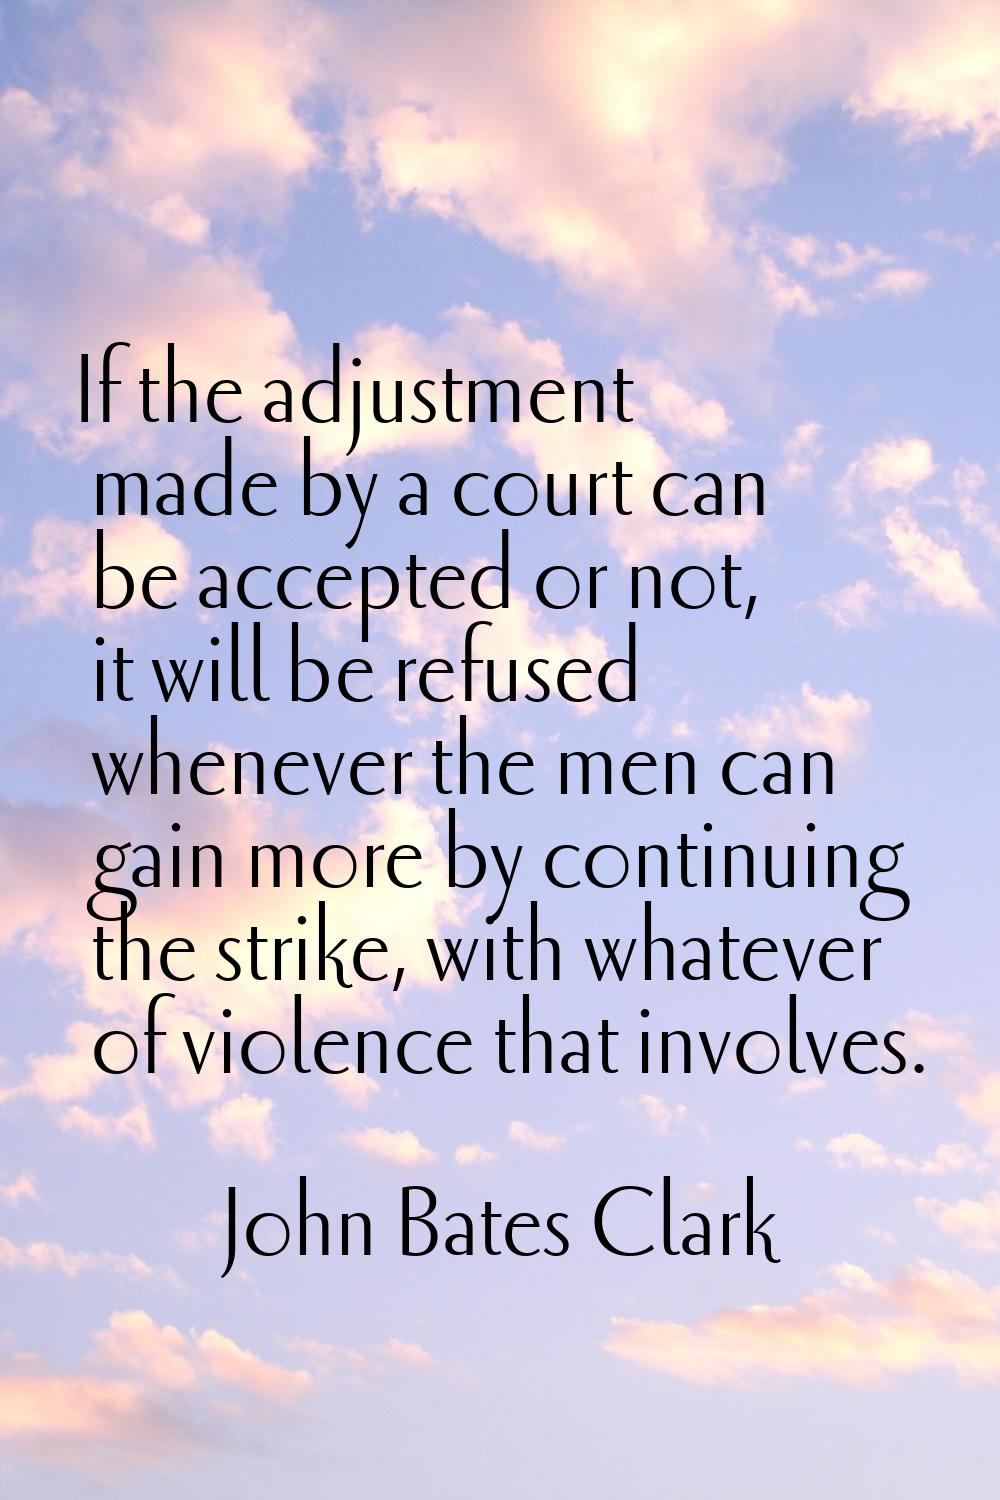 If the adjustment made by a court can be accepted or not, it will be refused whenever the men can g